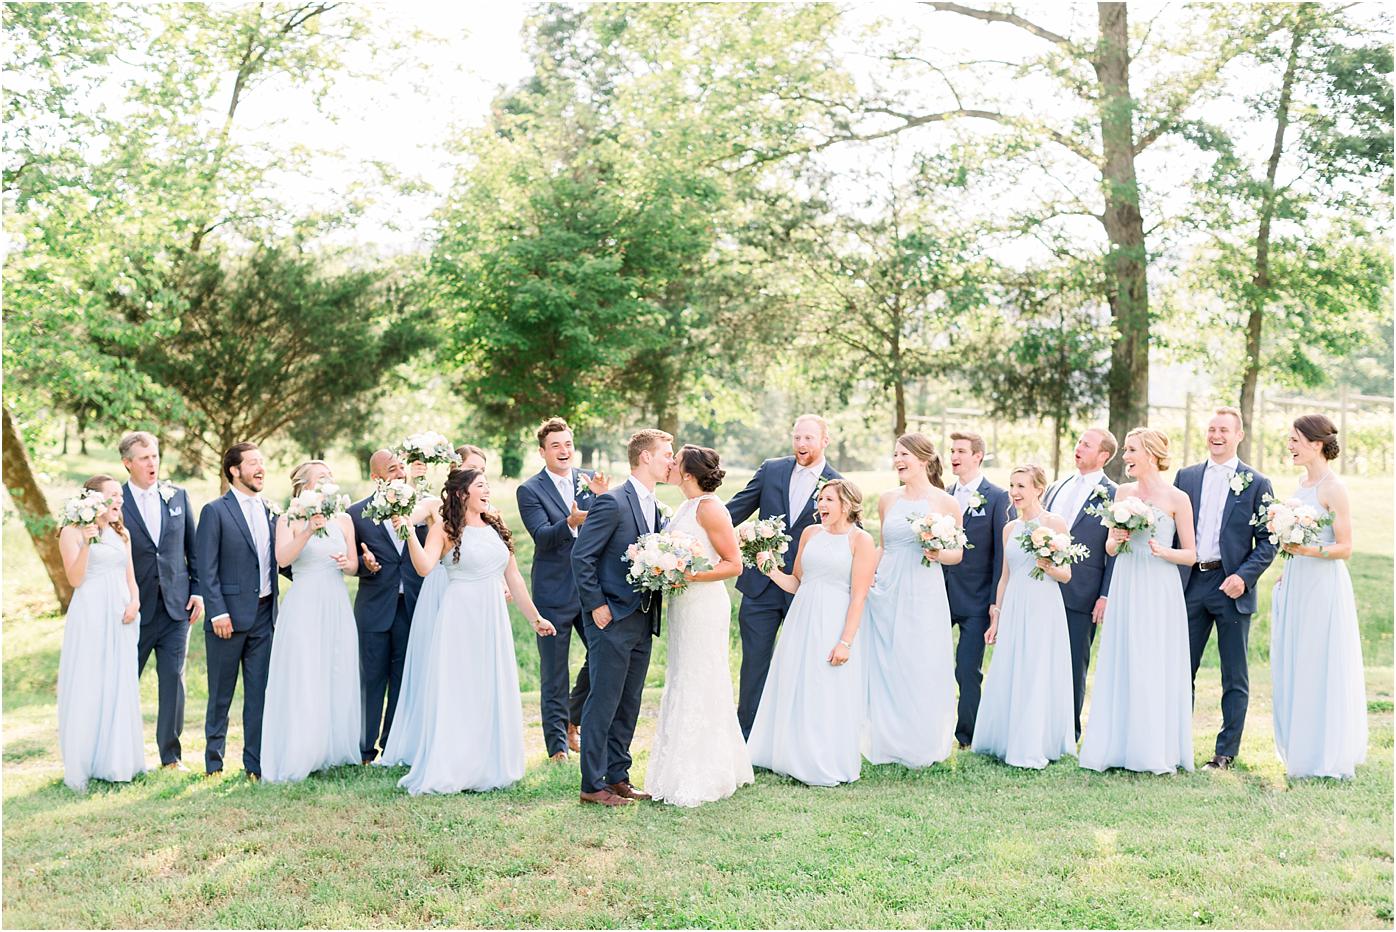 Bridal party cheering the bride and groom on their new marriage. Sky blue bridesmaid dresses, navy suits, and blush and peach bouquets with Veritas winery in the background